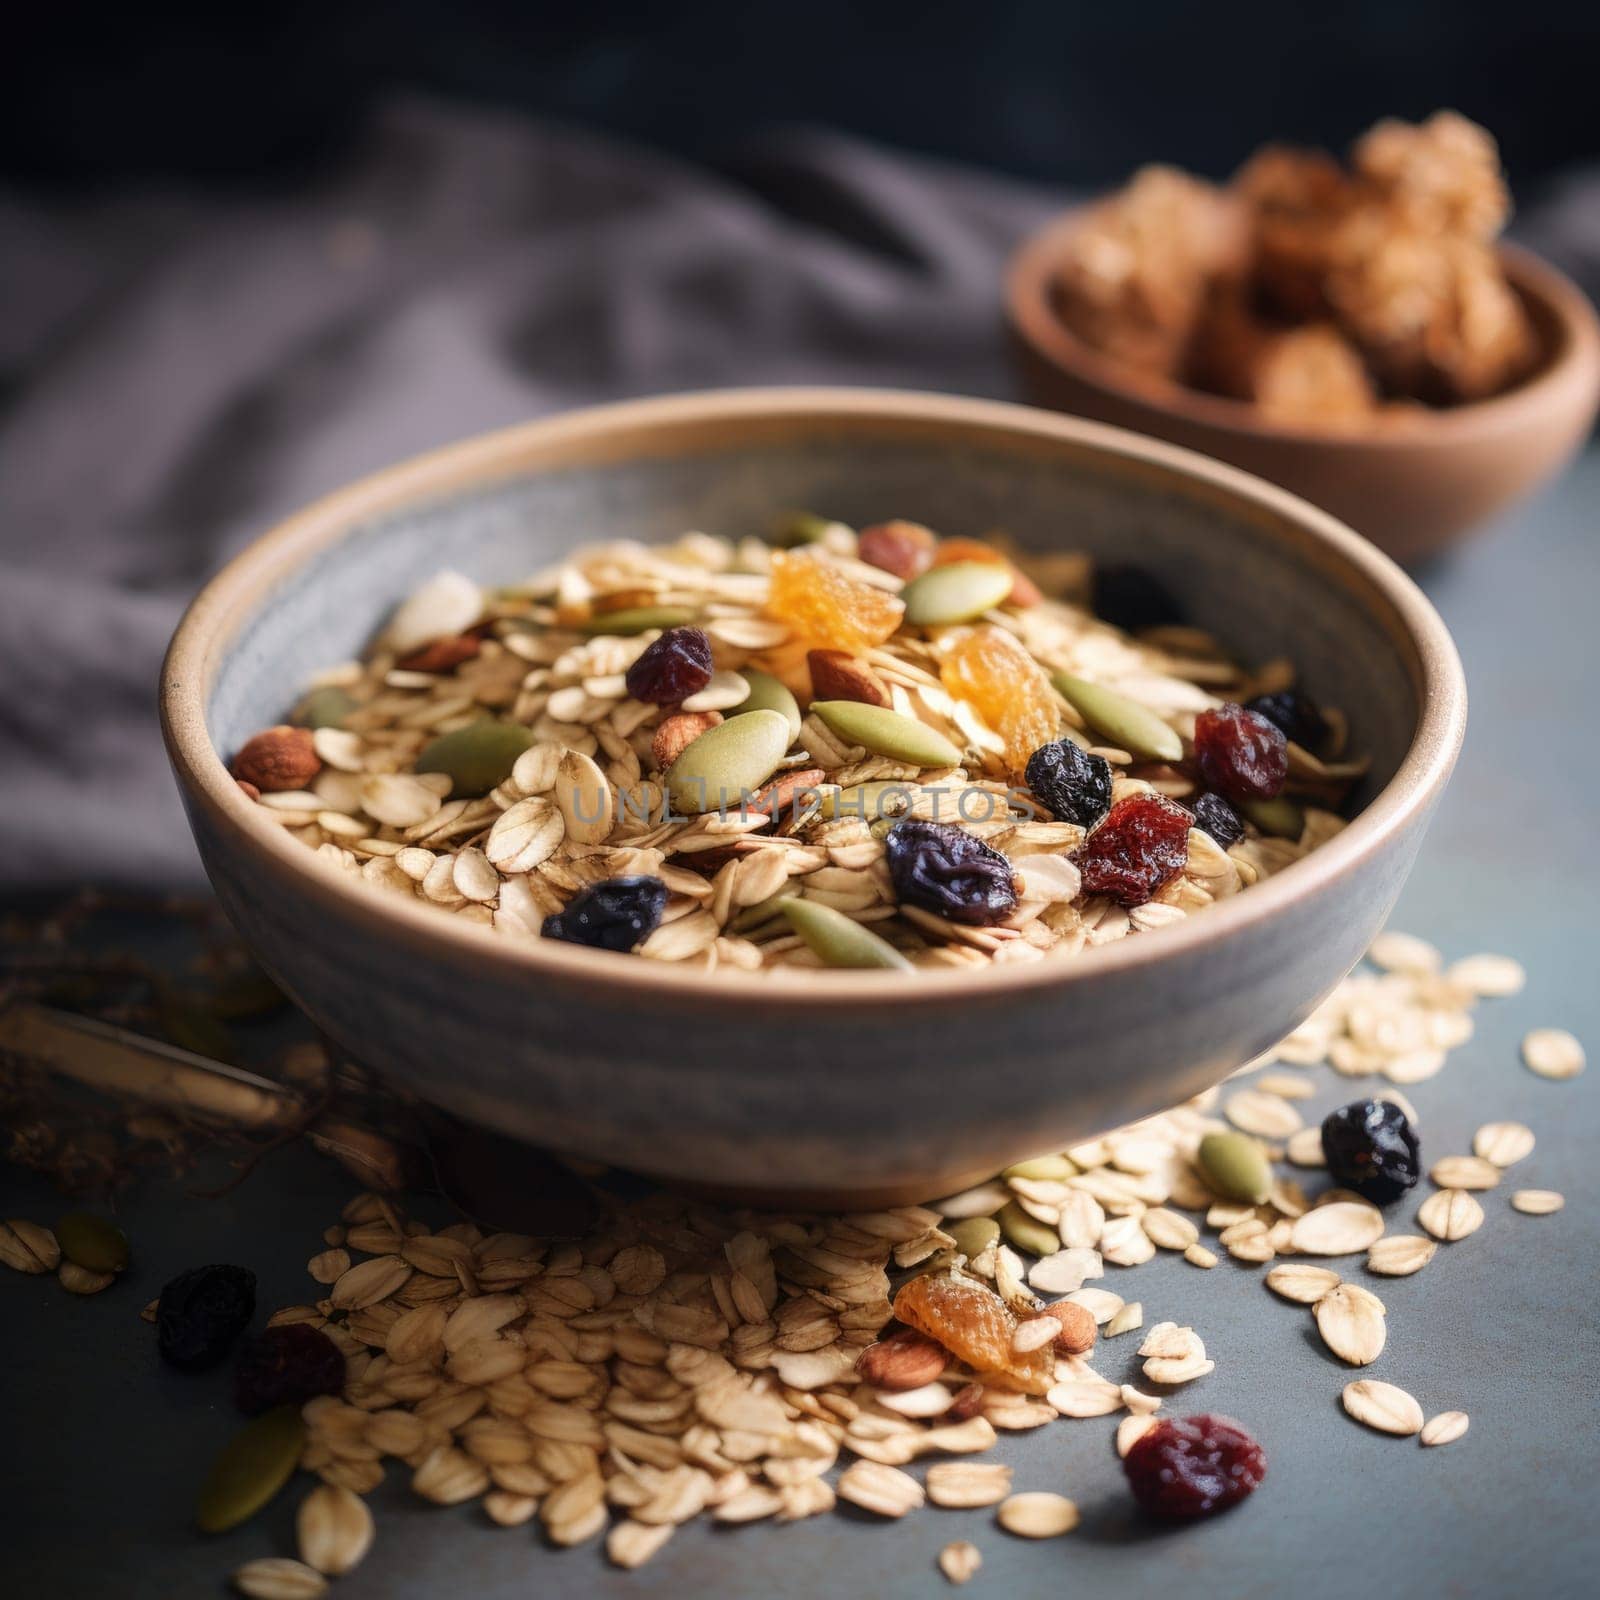 Muesli with dried fruits and nuts in a bowl